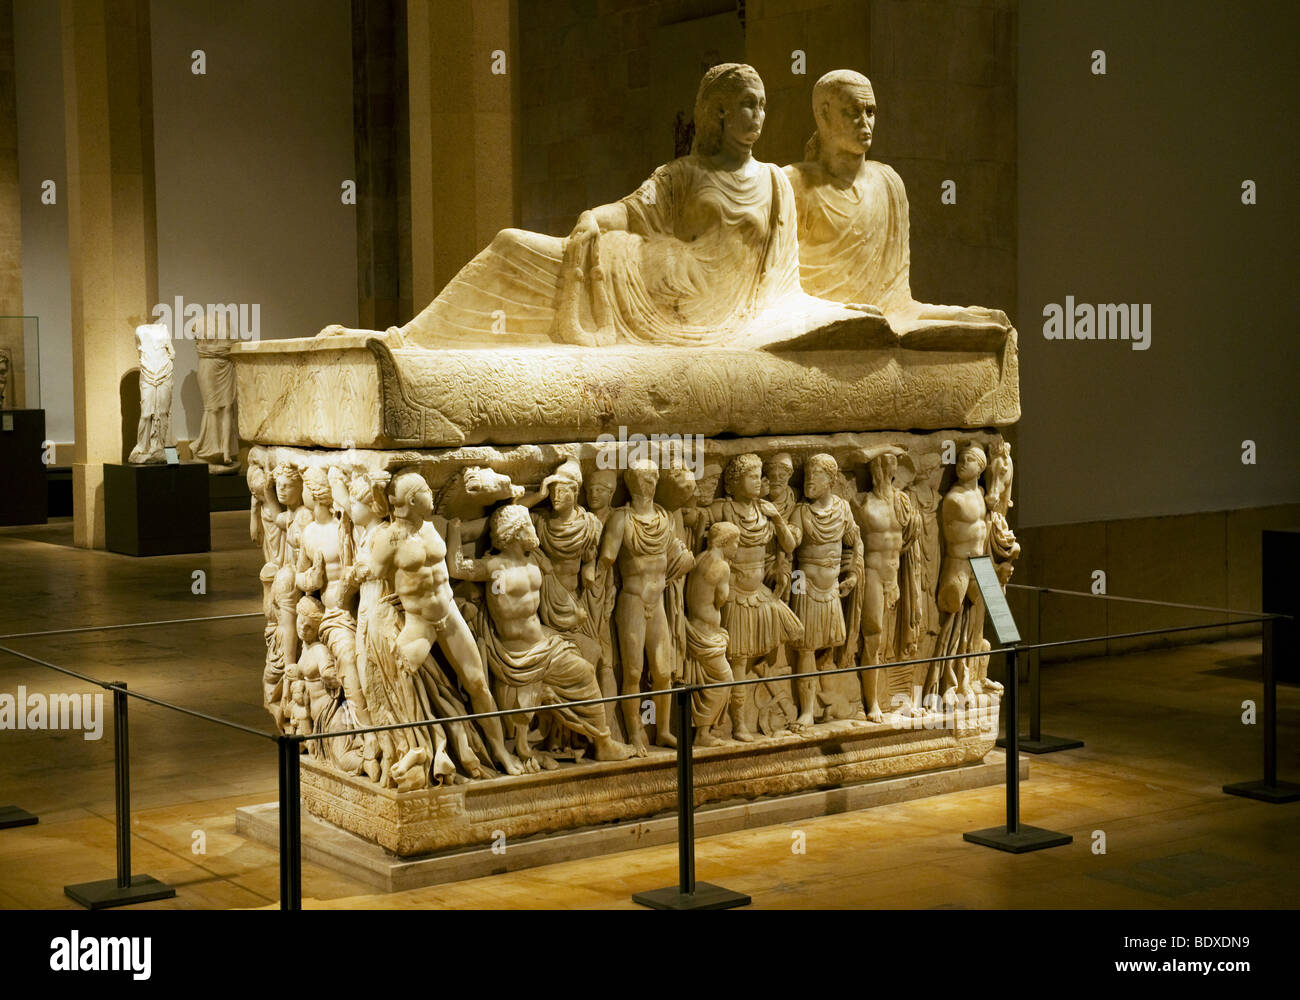 The intricately carved Legend of Achilles sarcophagus, dating from the 2nd century AD, housed in the National Museum of Beirut Stock Photo